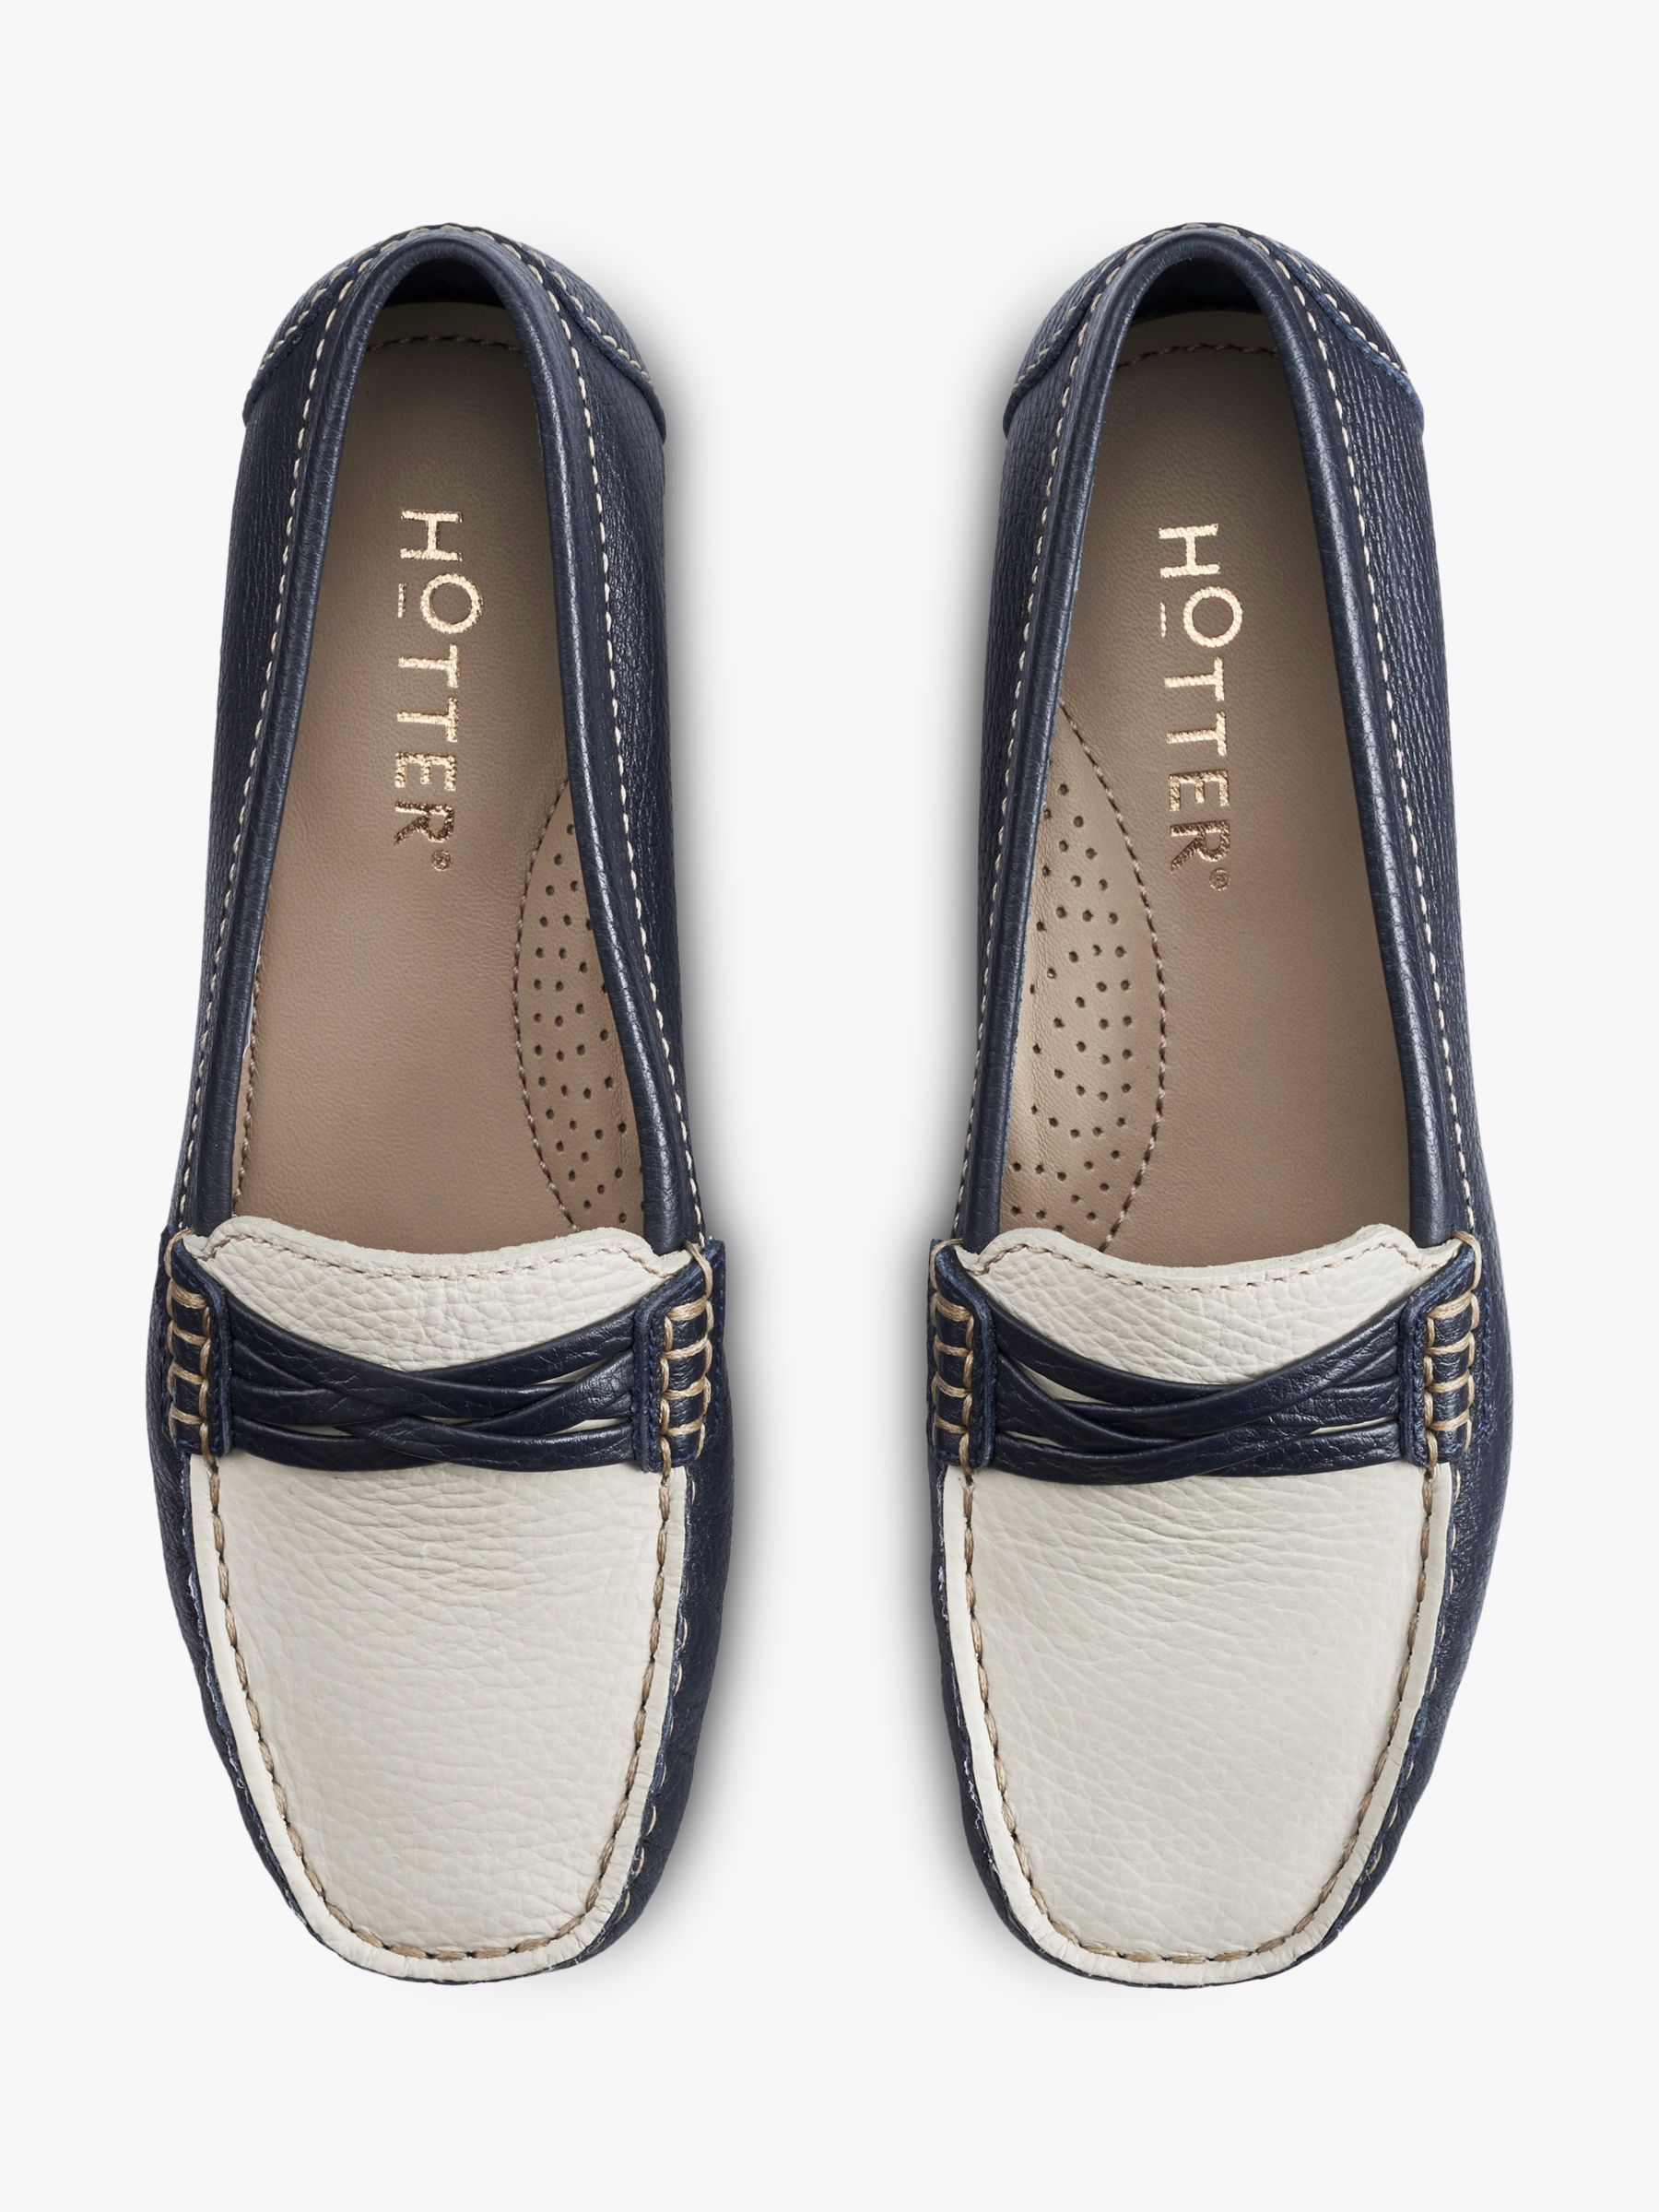 Buy Hotter Marina Driver Style Moccasins Online at johnlewis.com